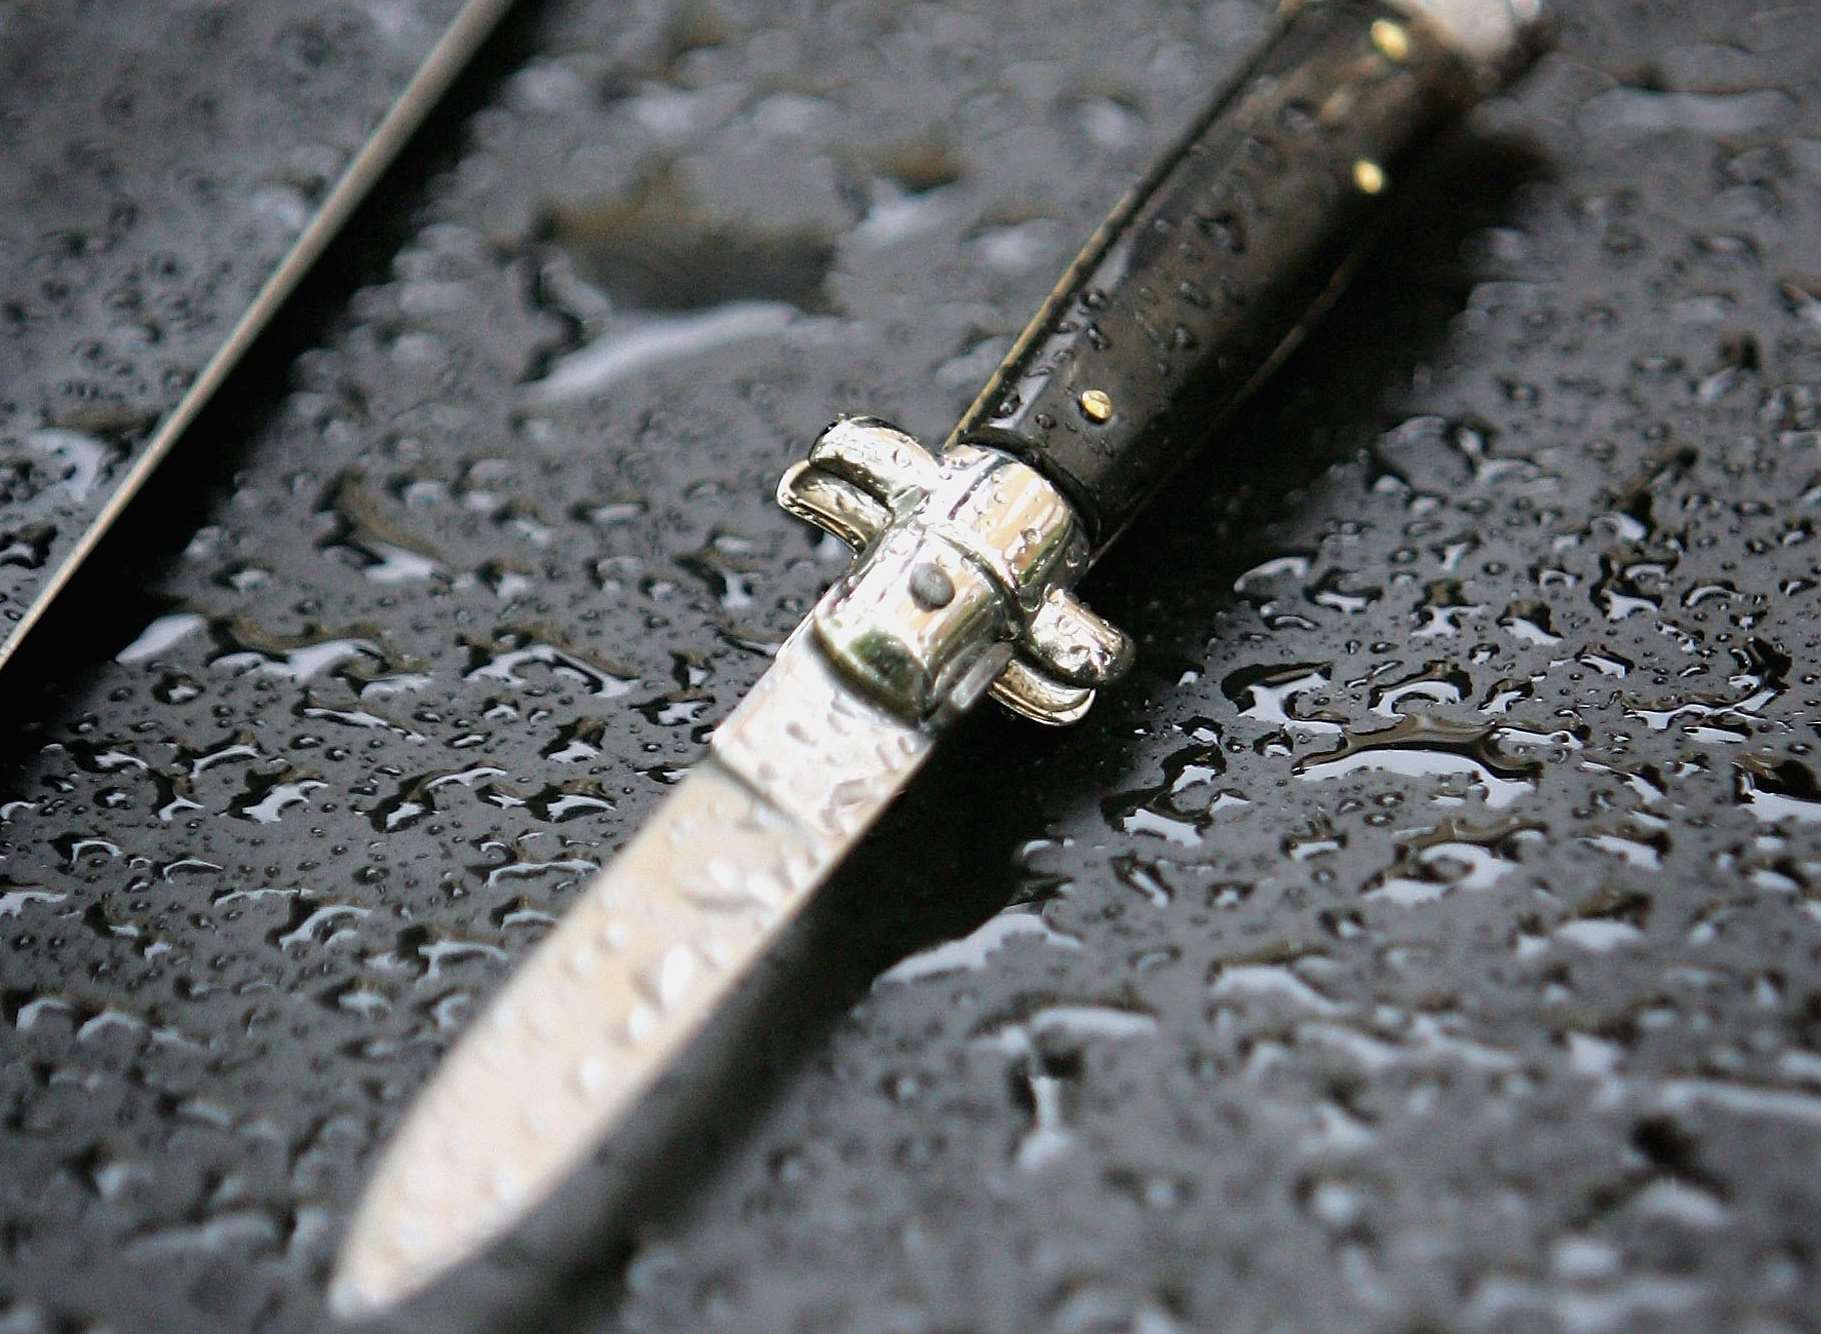 Police were called to Deal following reports a person was in possession of a knife. Stock Image.